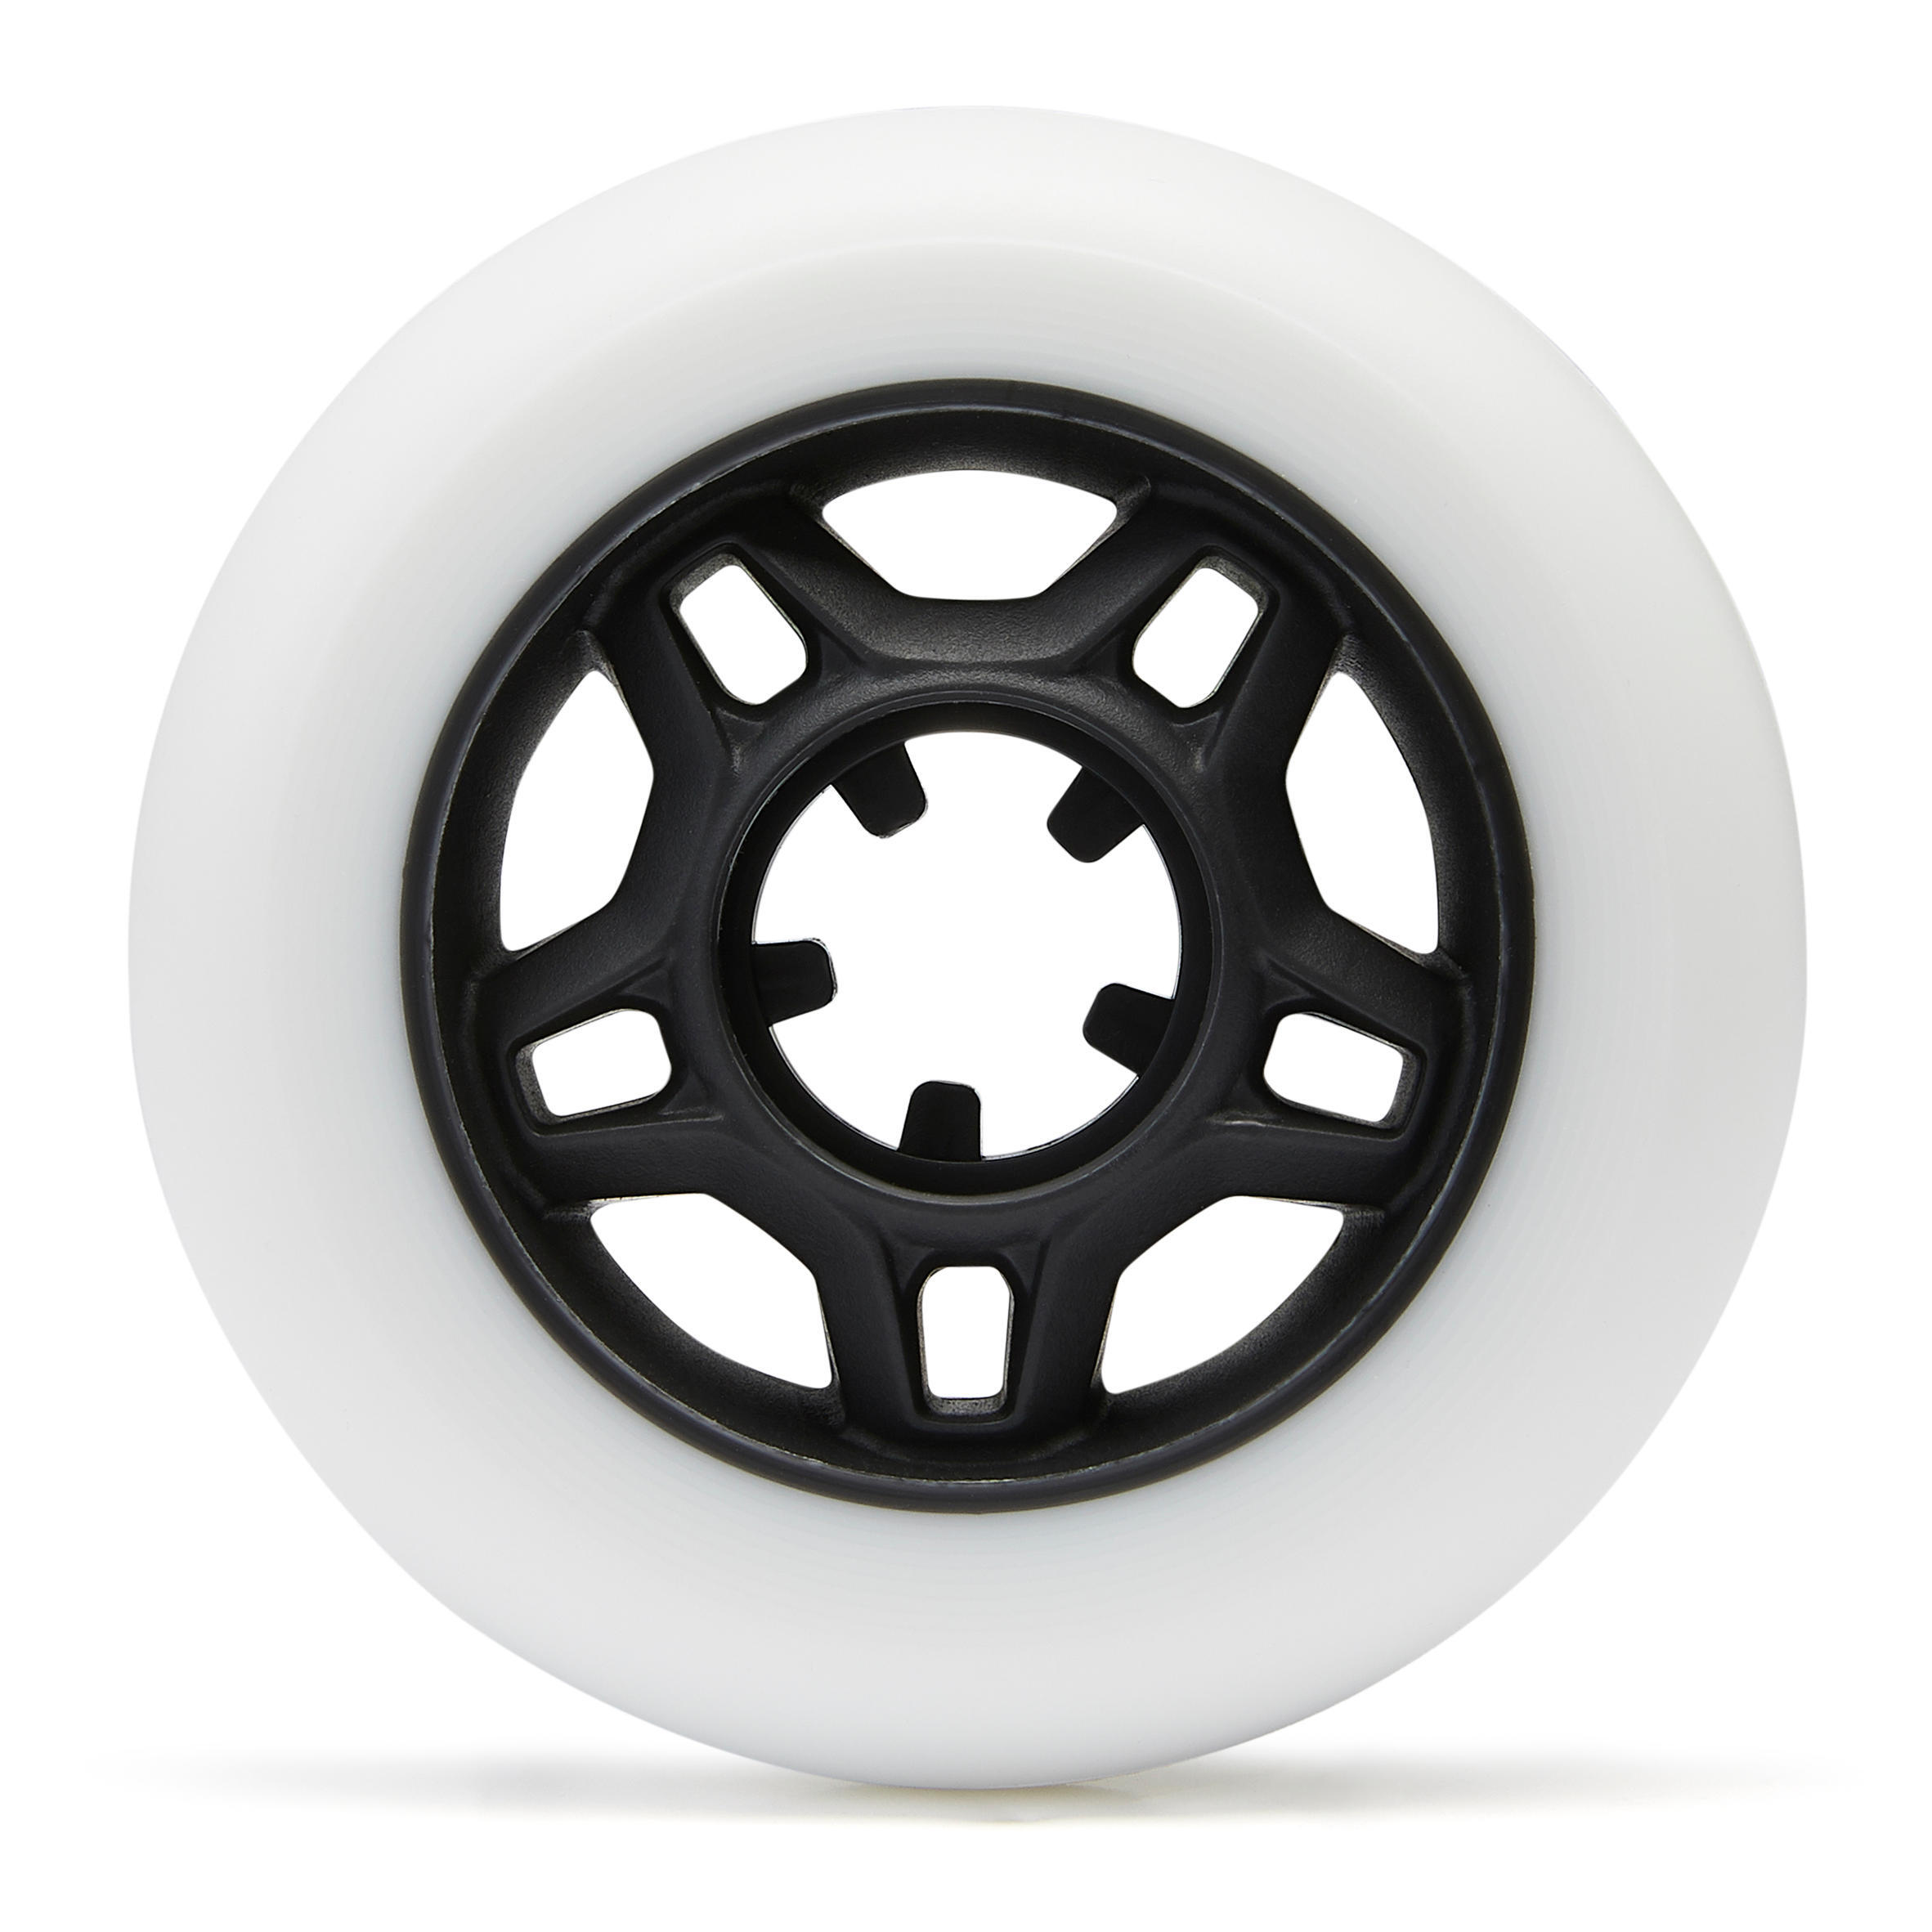 76mm 80A Adult Fitness Inline Skating Wheels 4-Pack Fit - White 3/6